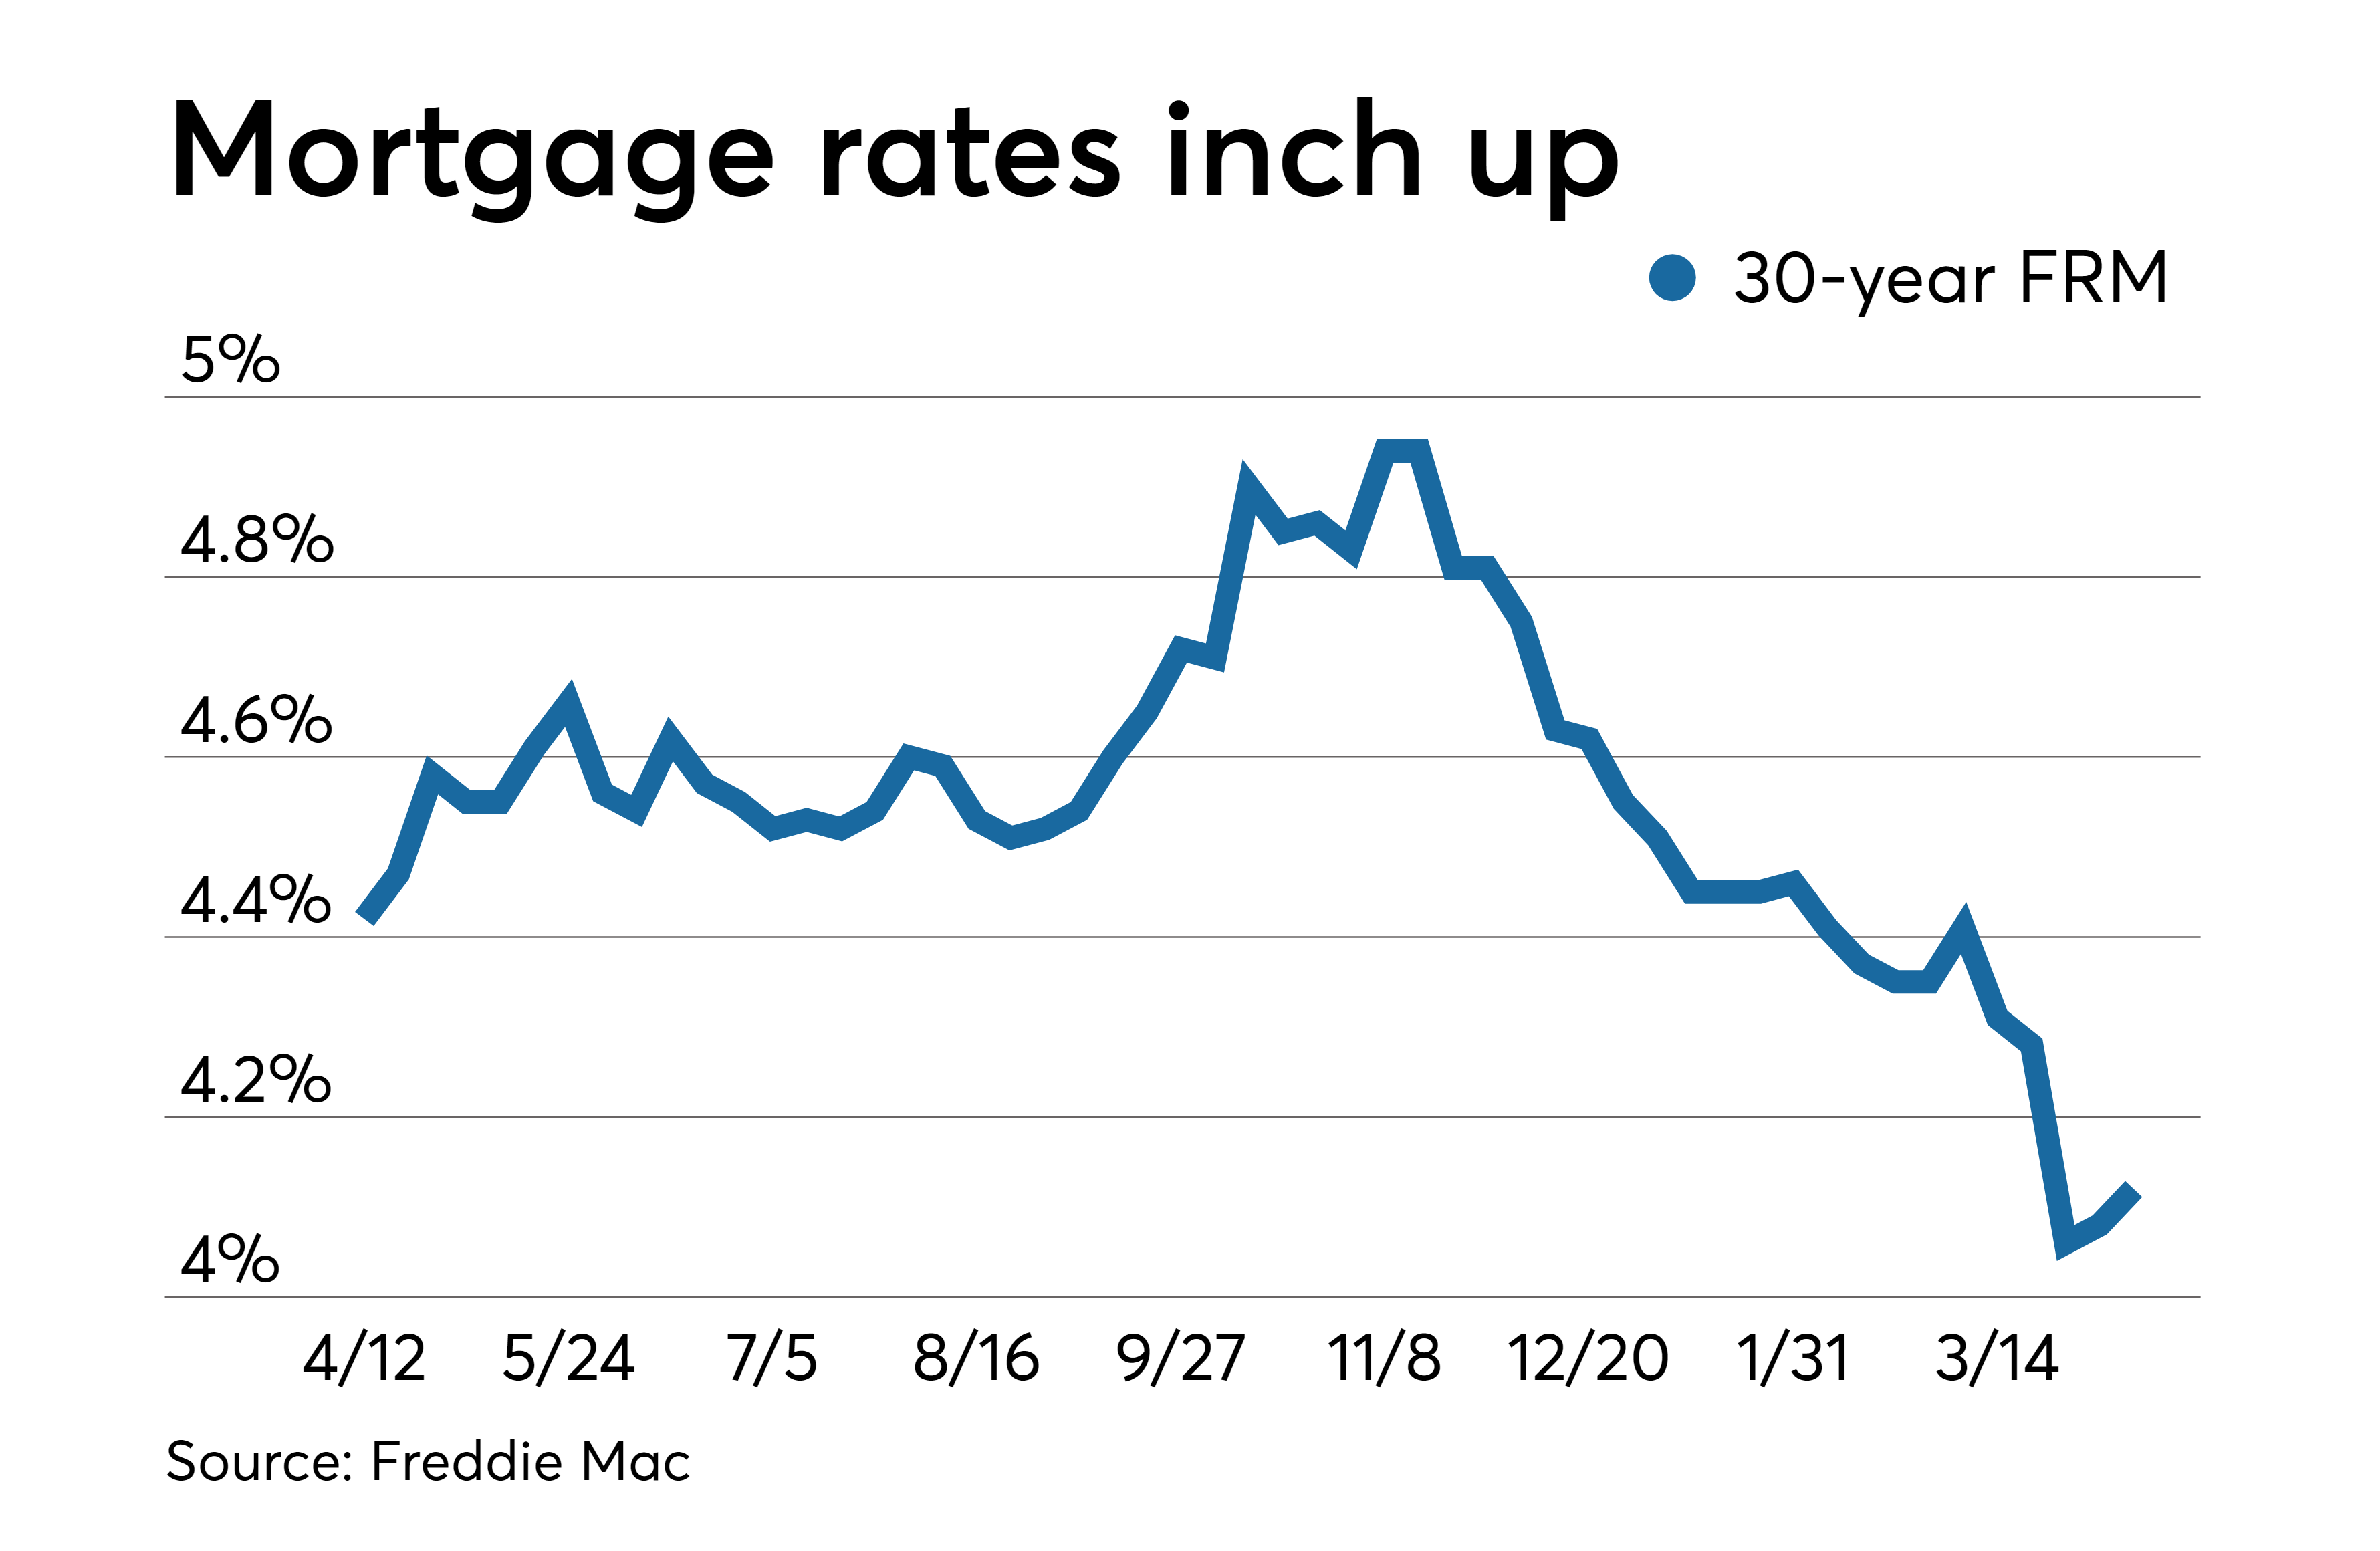 Average mortgage rates expected to remain low, lifting home purchases ...